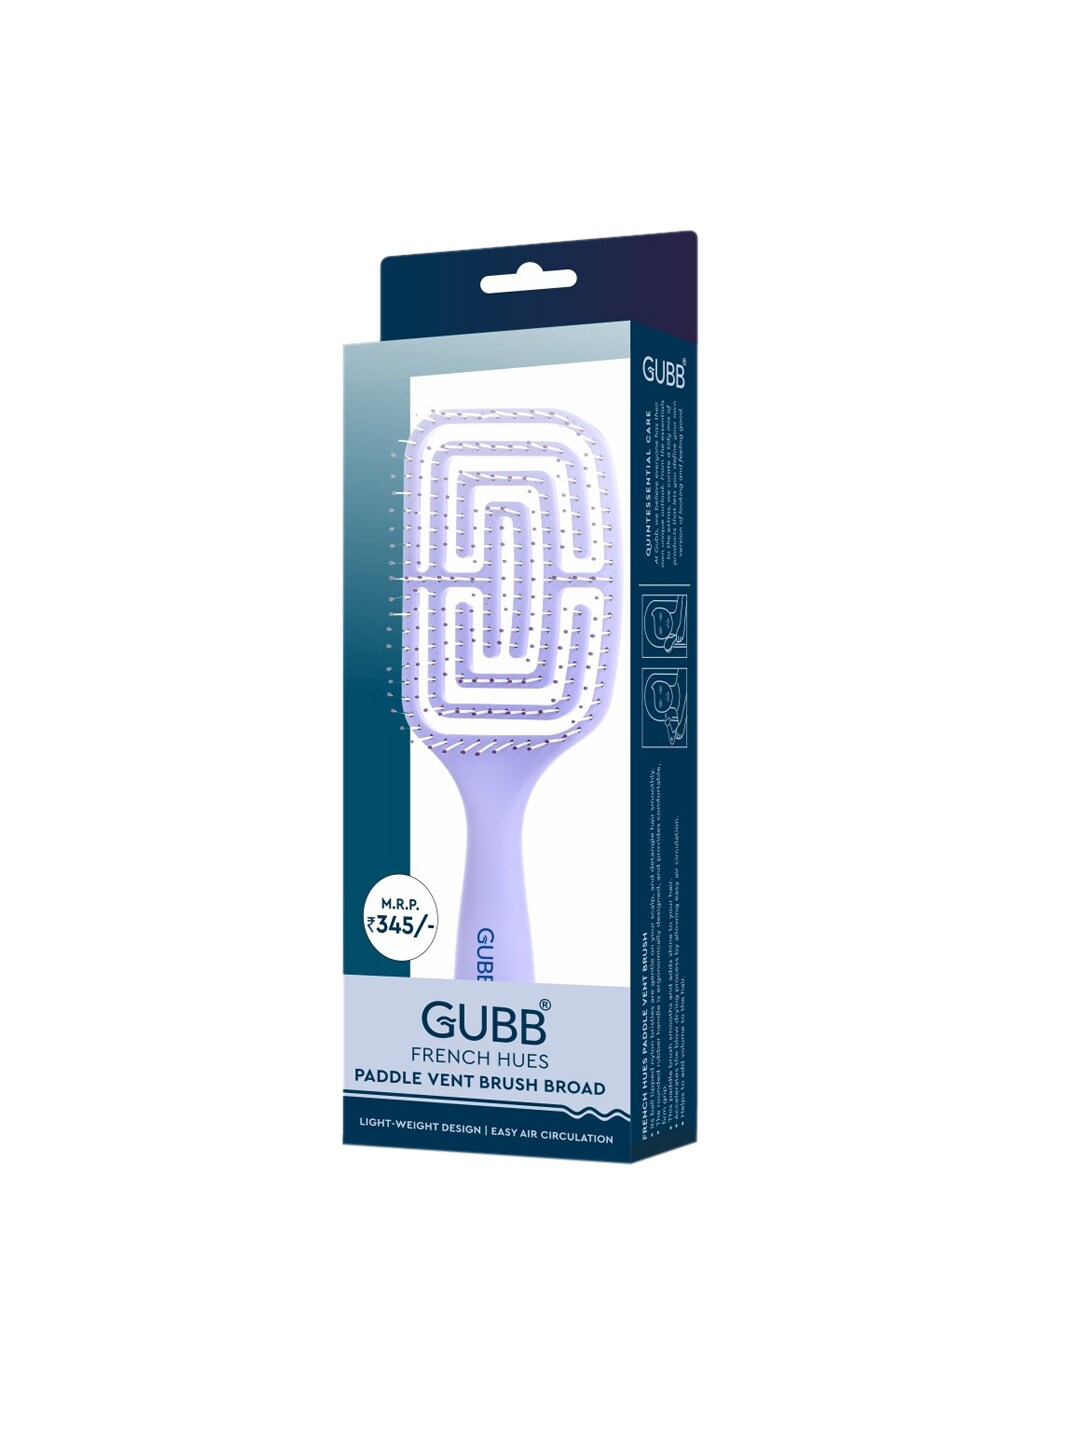 GUBB French Hues Paddle Vent Hair Brush Broad (8882) Price in India